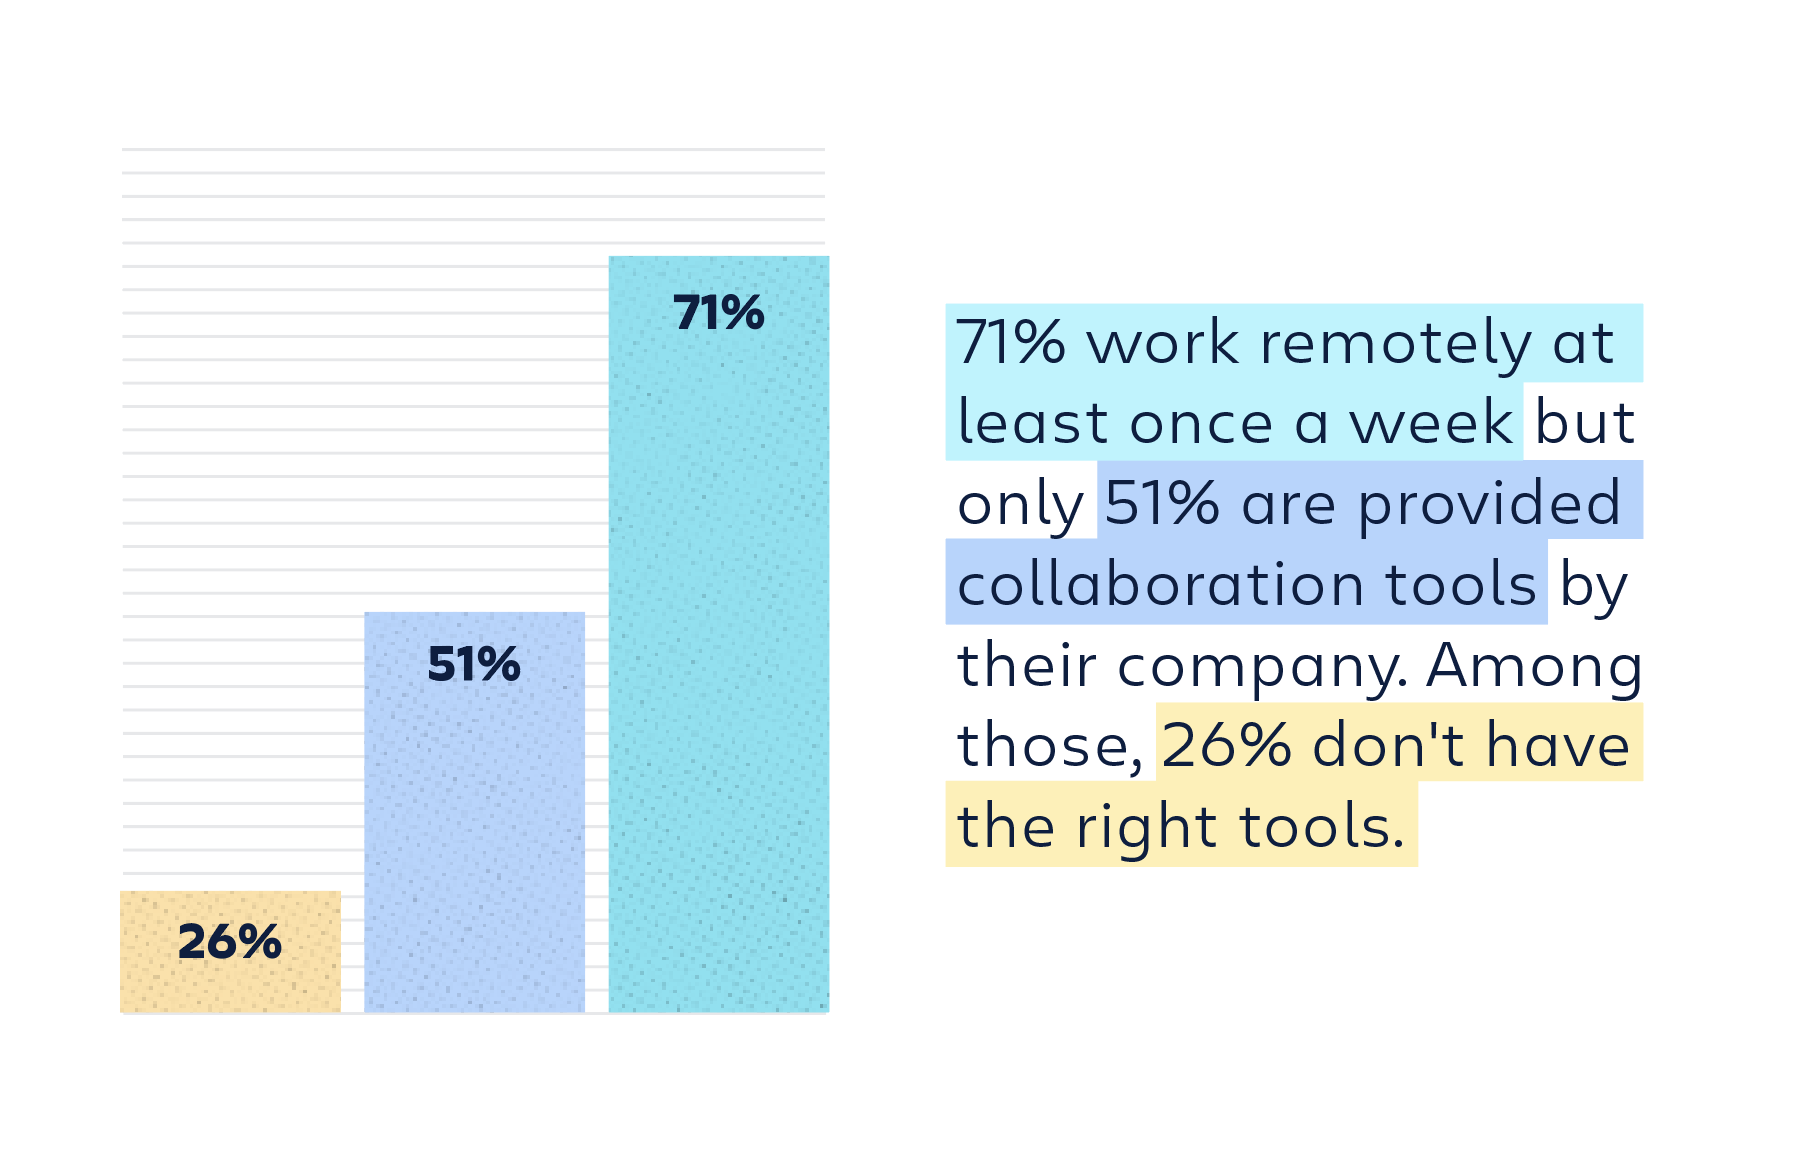 71% work remotely at least once a week, but only 51% are provided collaboration tools be their company. Among those, 26% don't have the right tools.